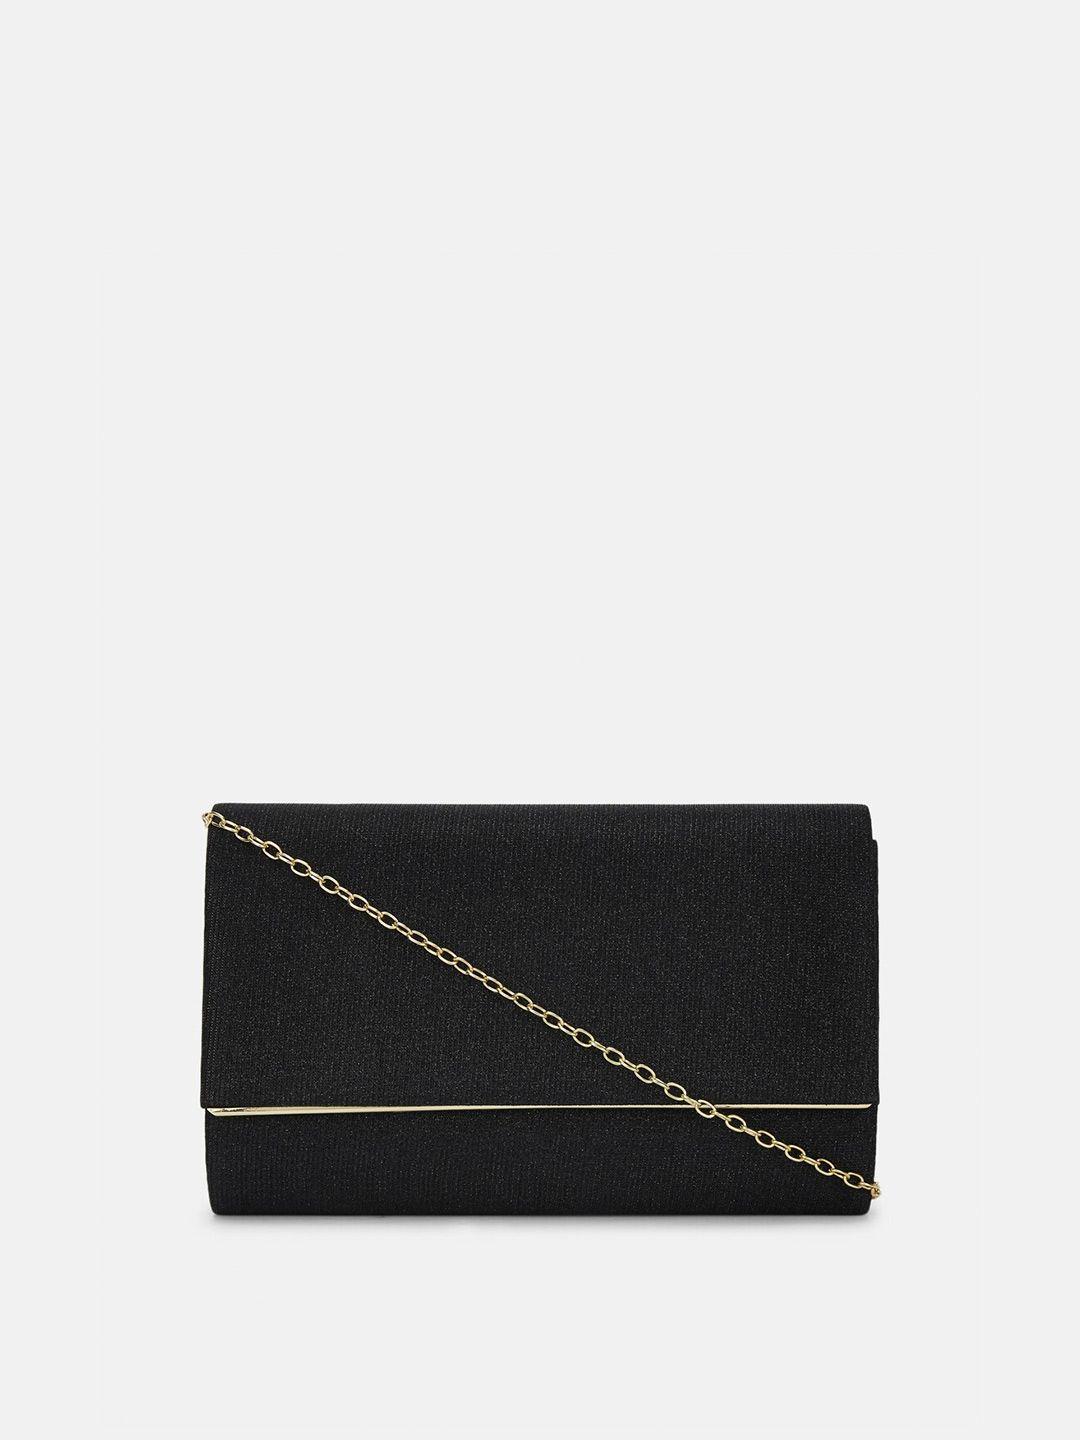 forever glam by pantaloons black & gold-toned box clutch